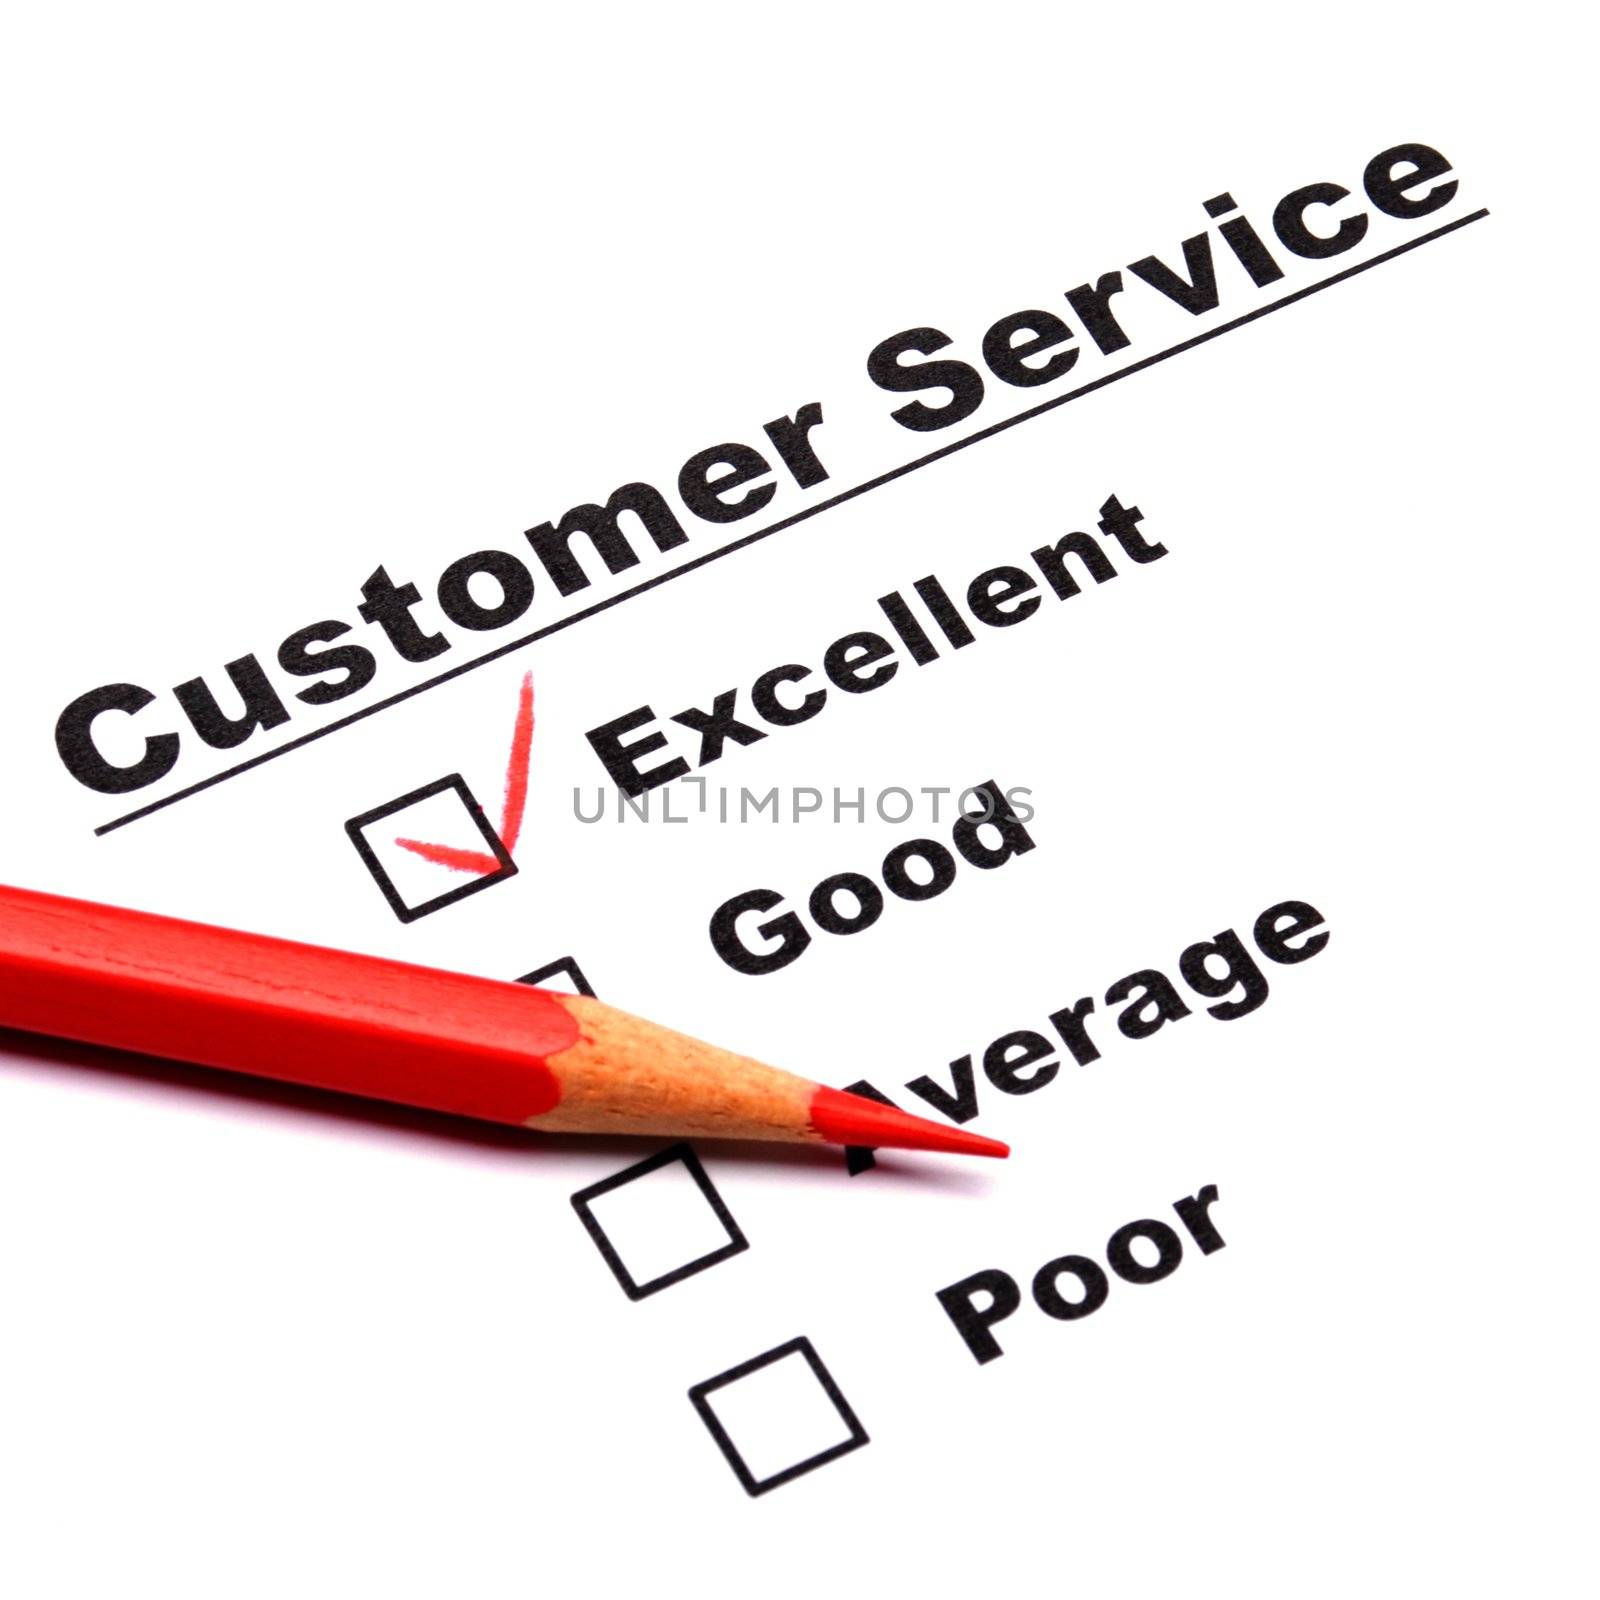 consumer survey with questionnaire checkbox to improve sales